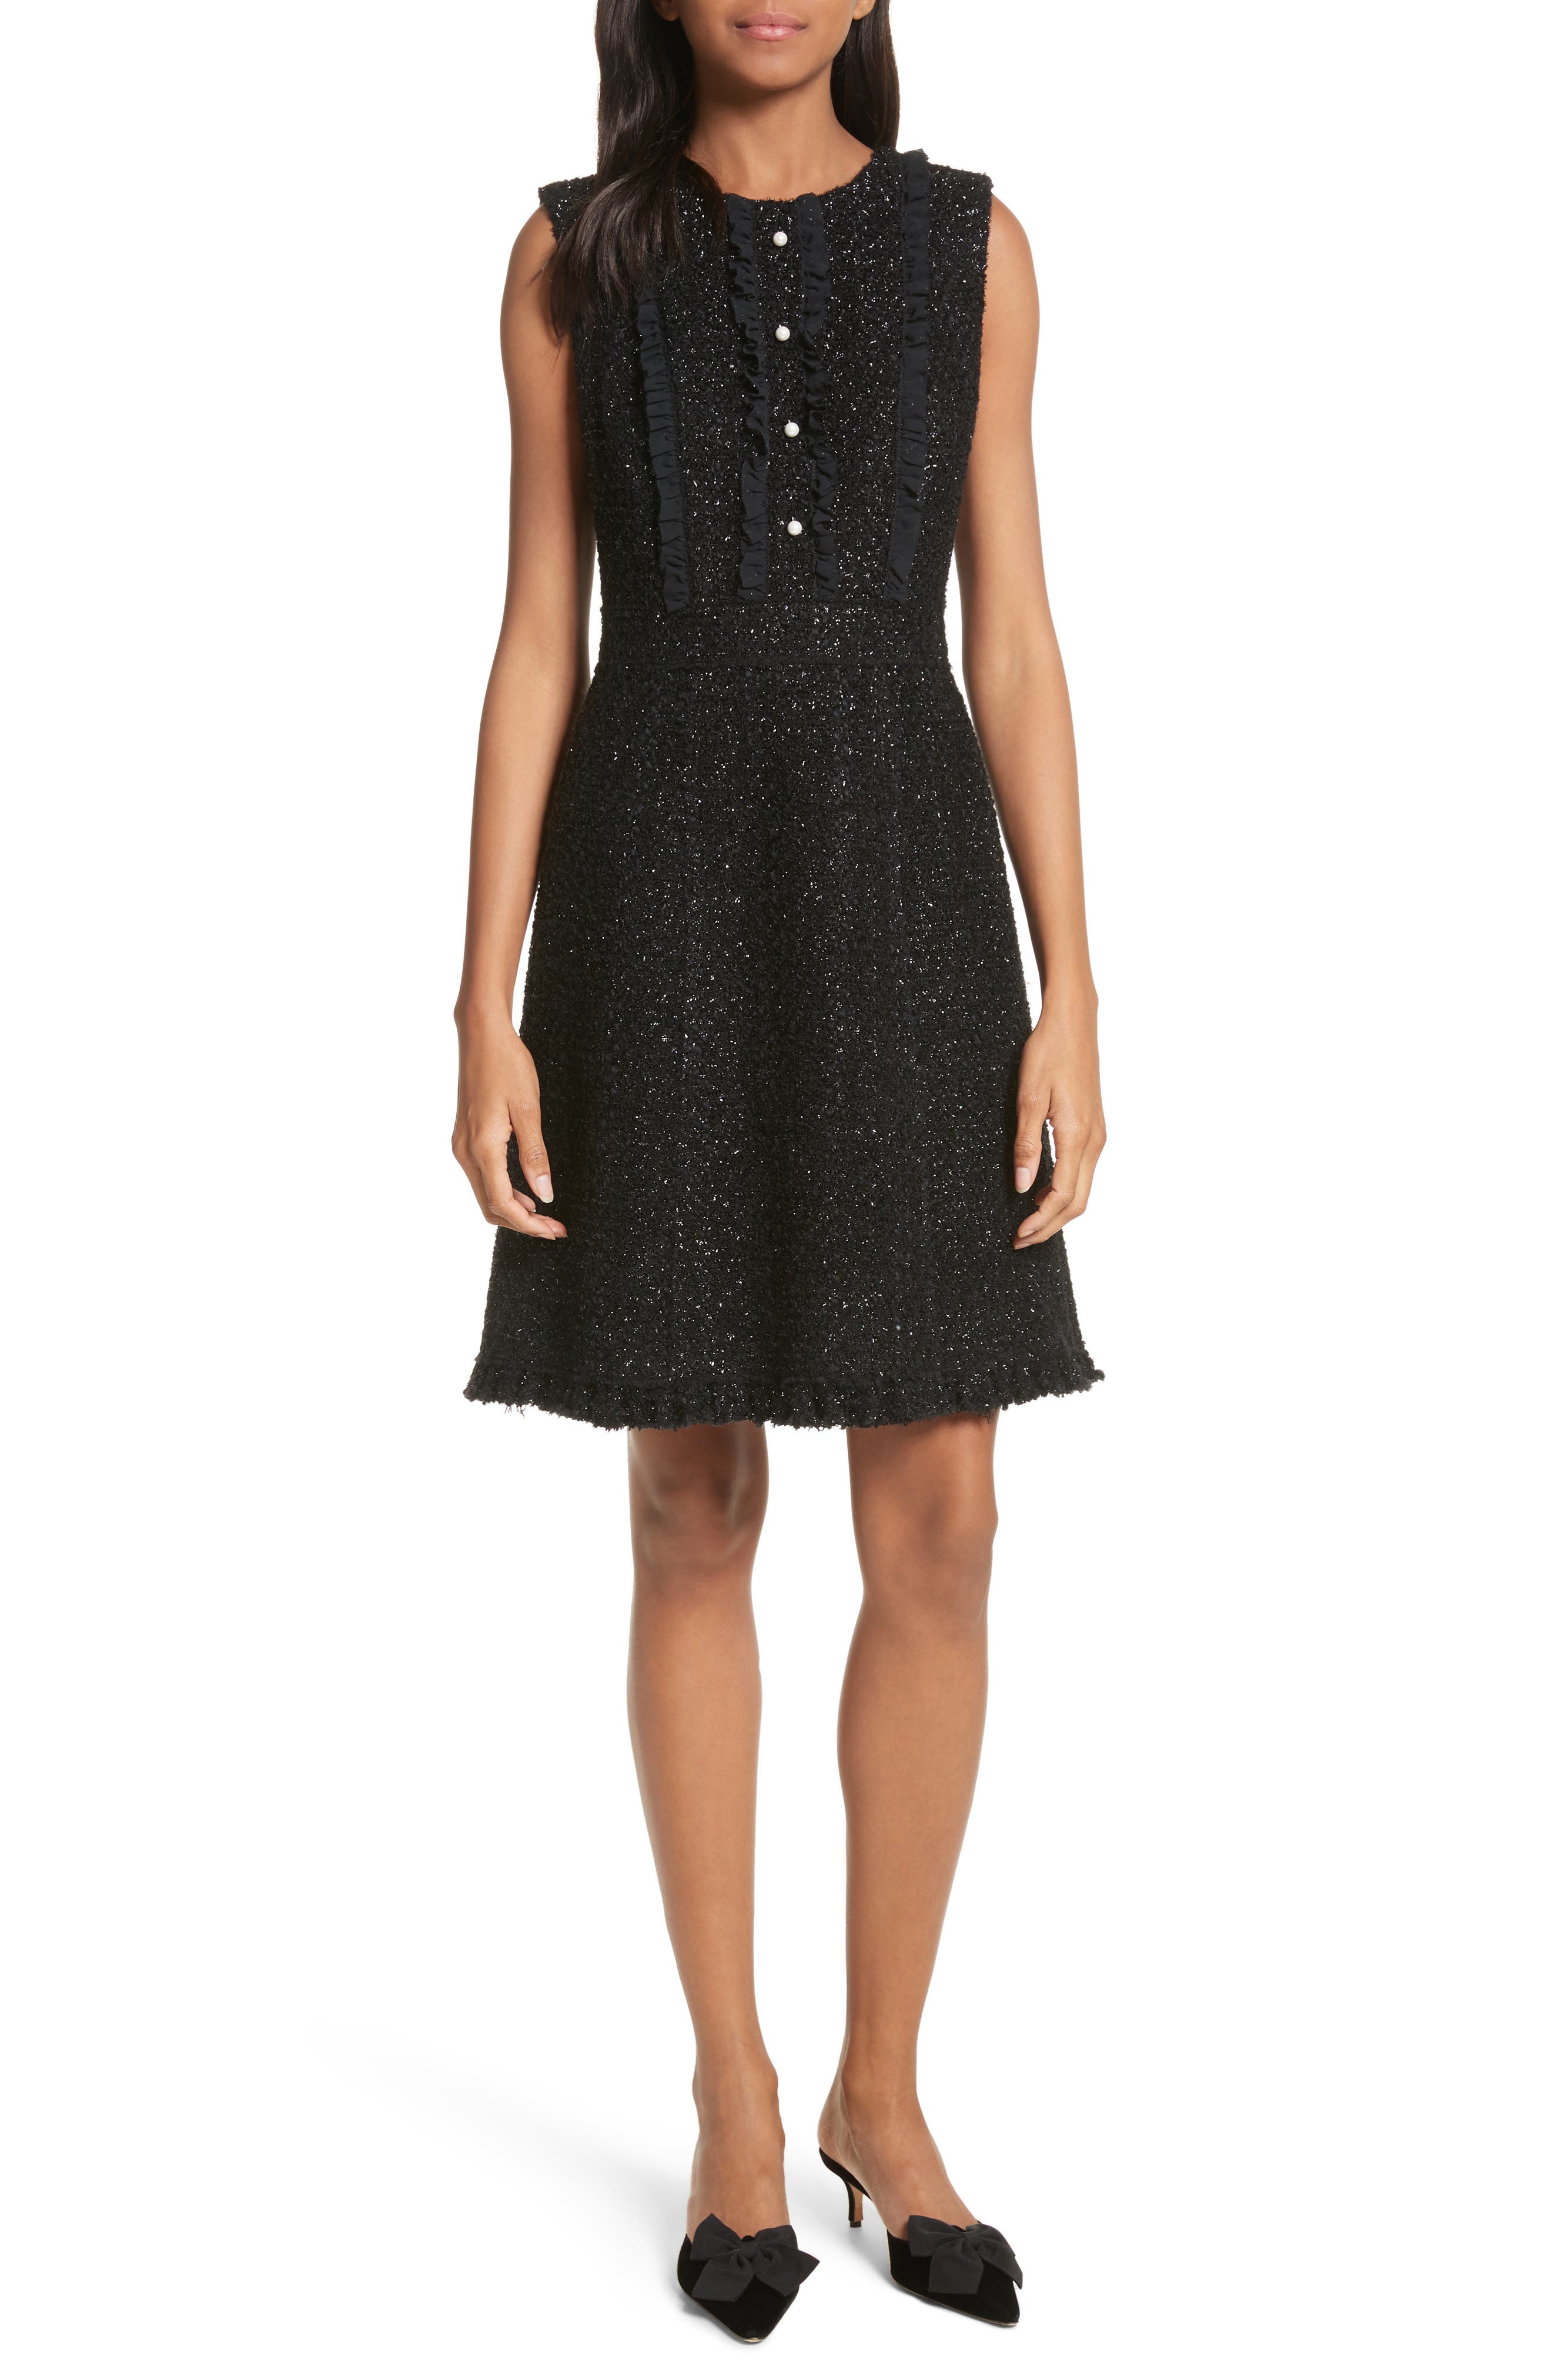 kate spade black dress with pearls